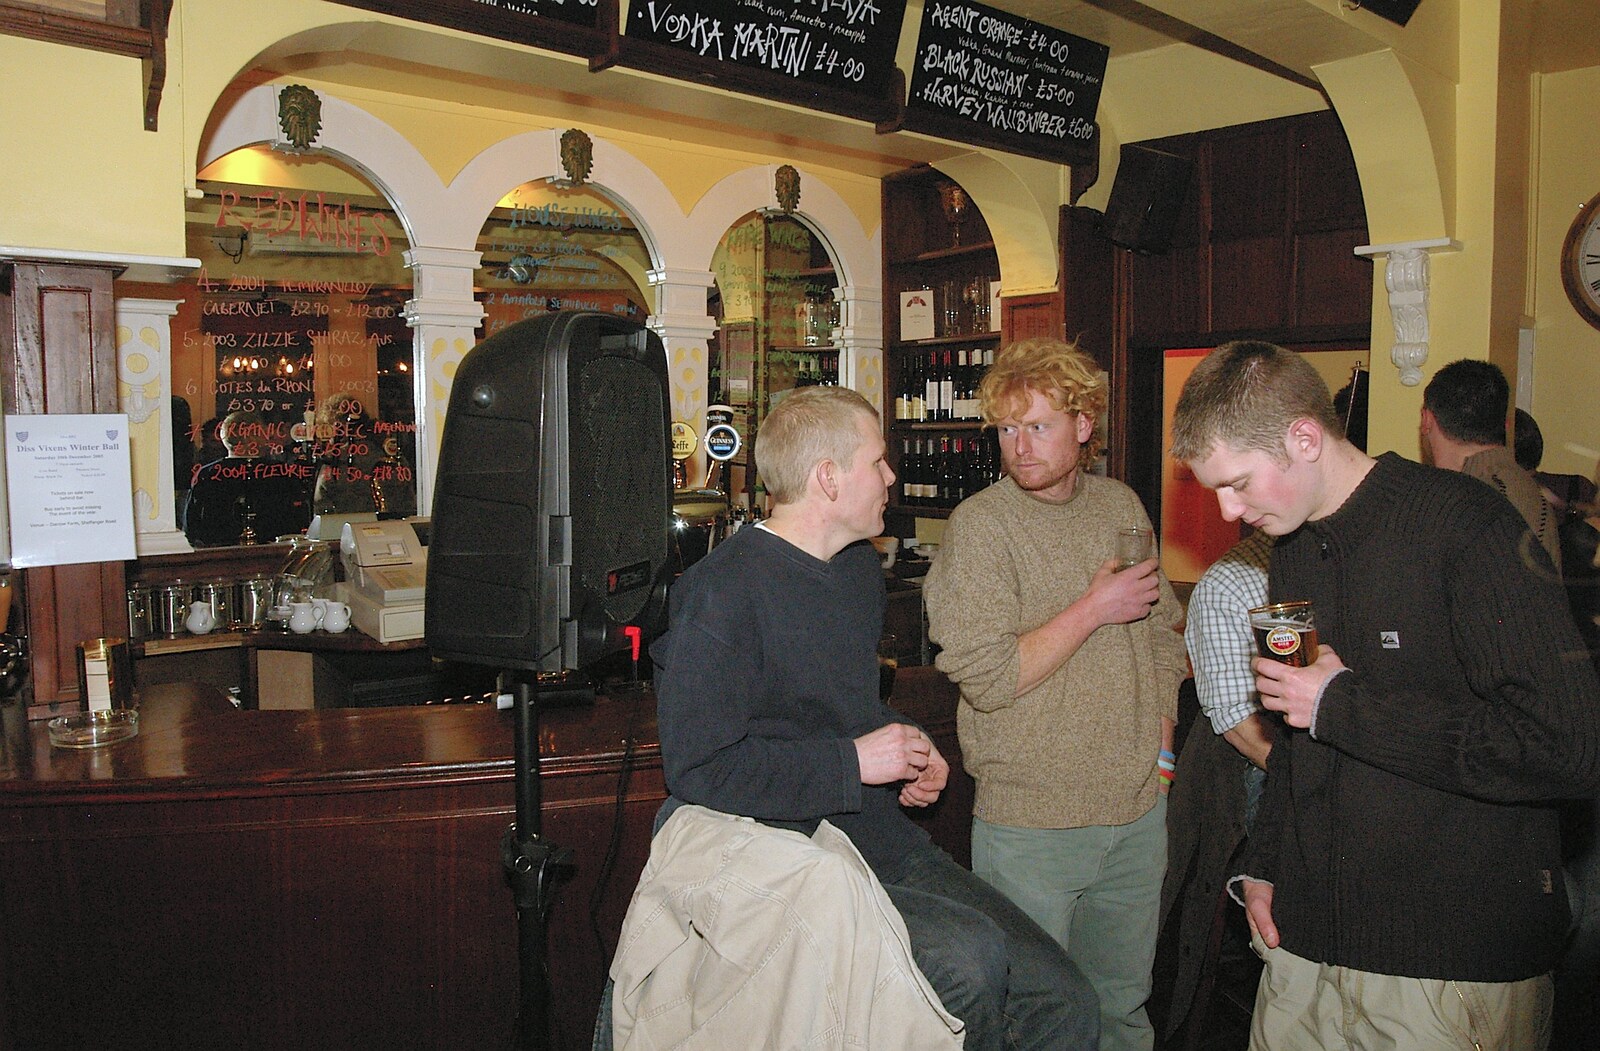 The eponymous bar of Bar 13 from Most Haunted, and Music at Bar 13 and the Cherry Tree, Mellis - 26th November 2005